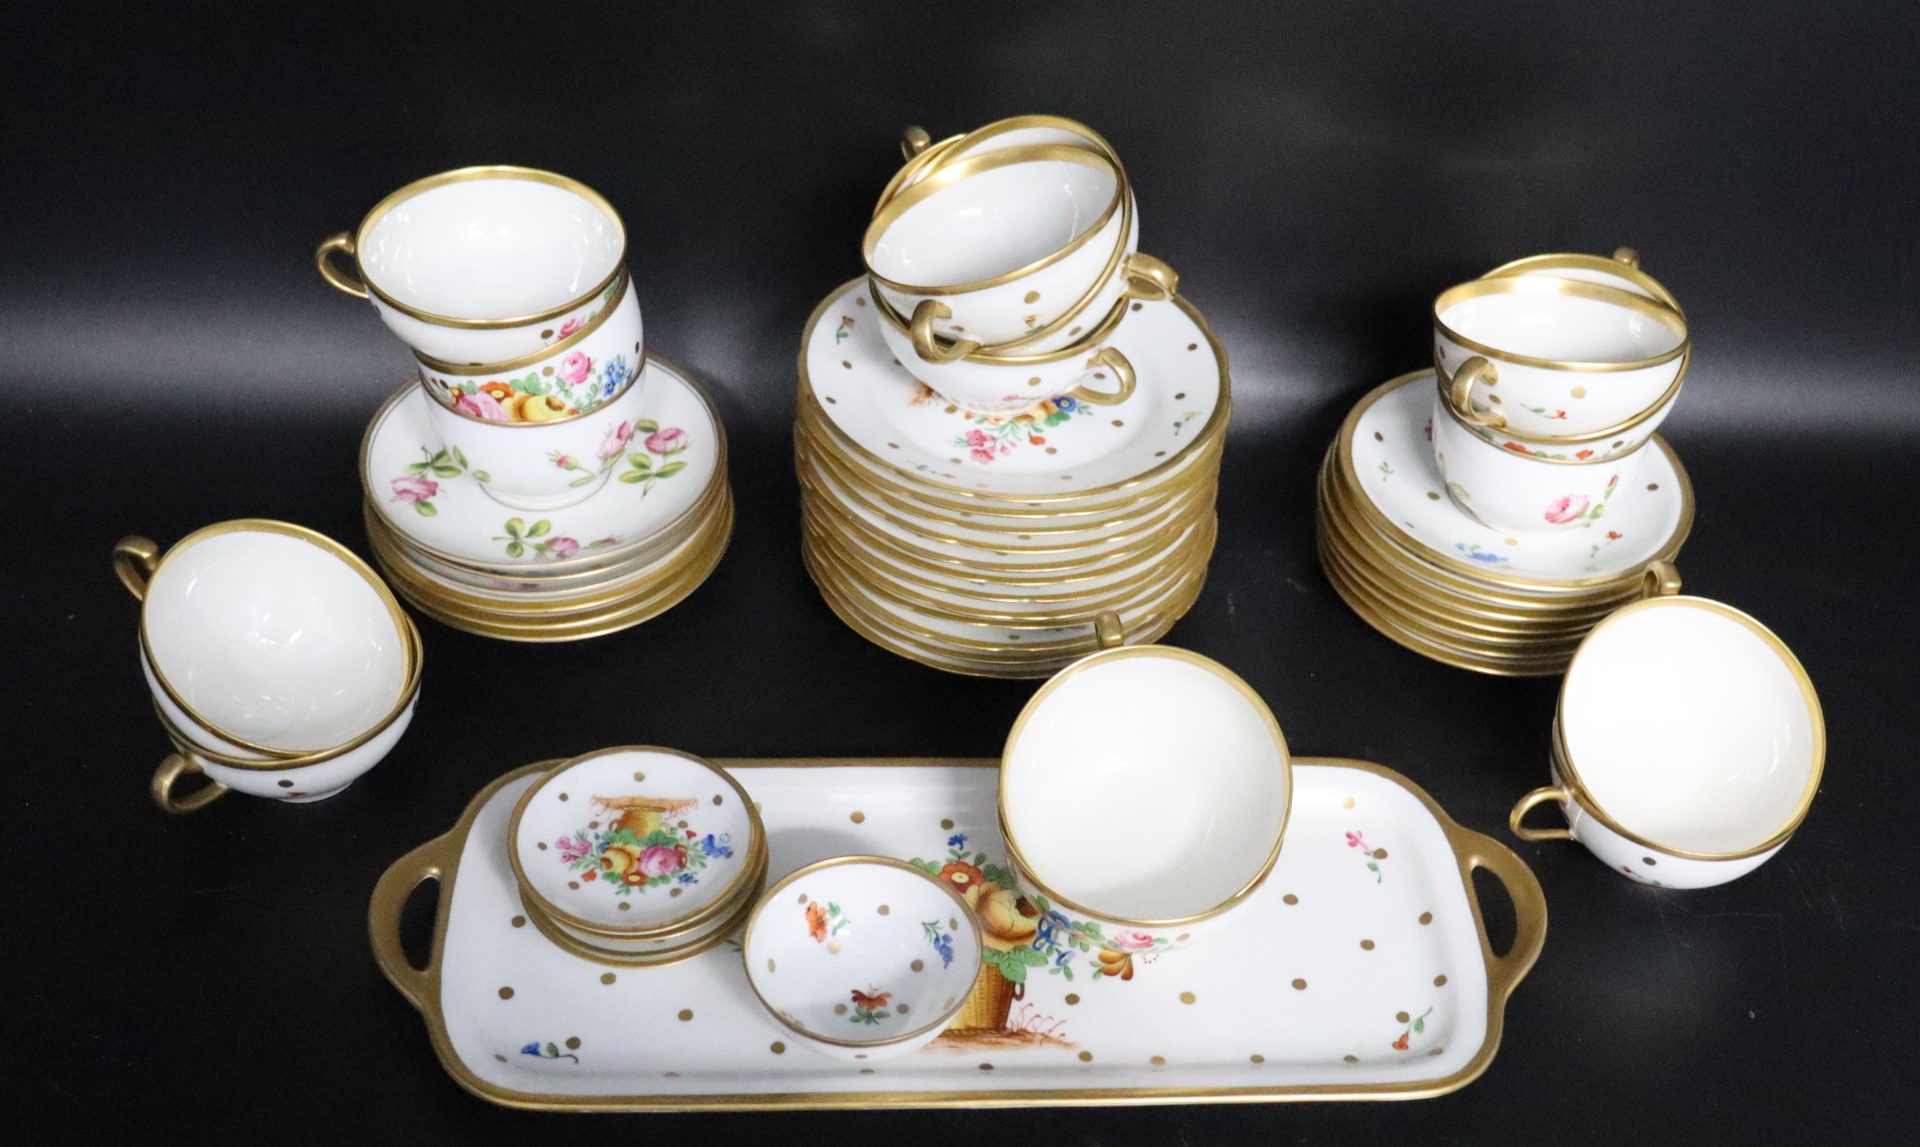 LIMOGES PORCELAIN SERVICE. To include